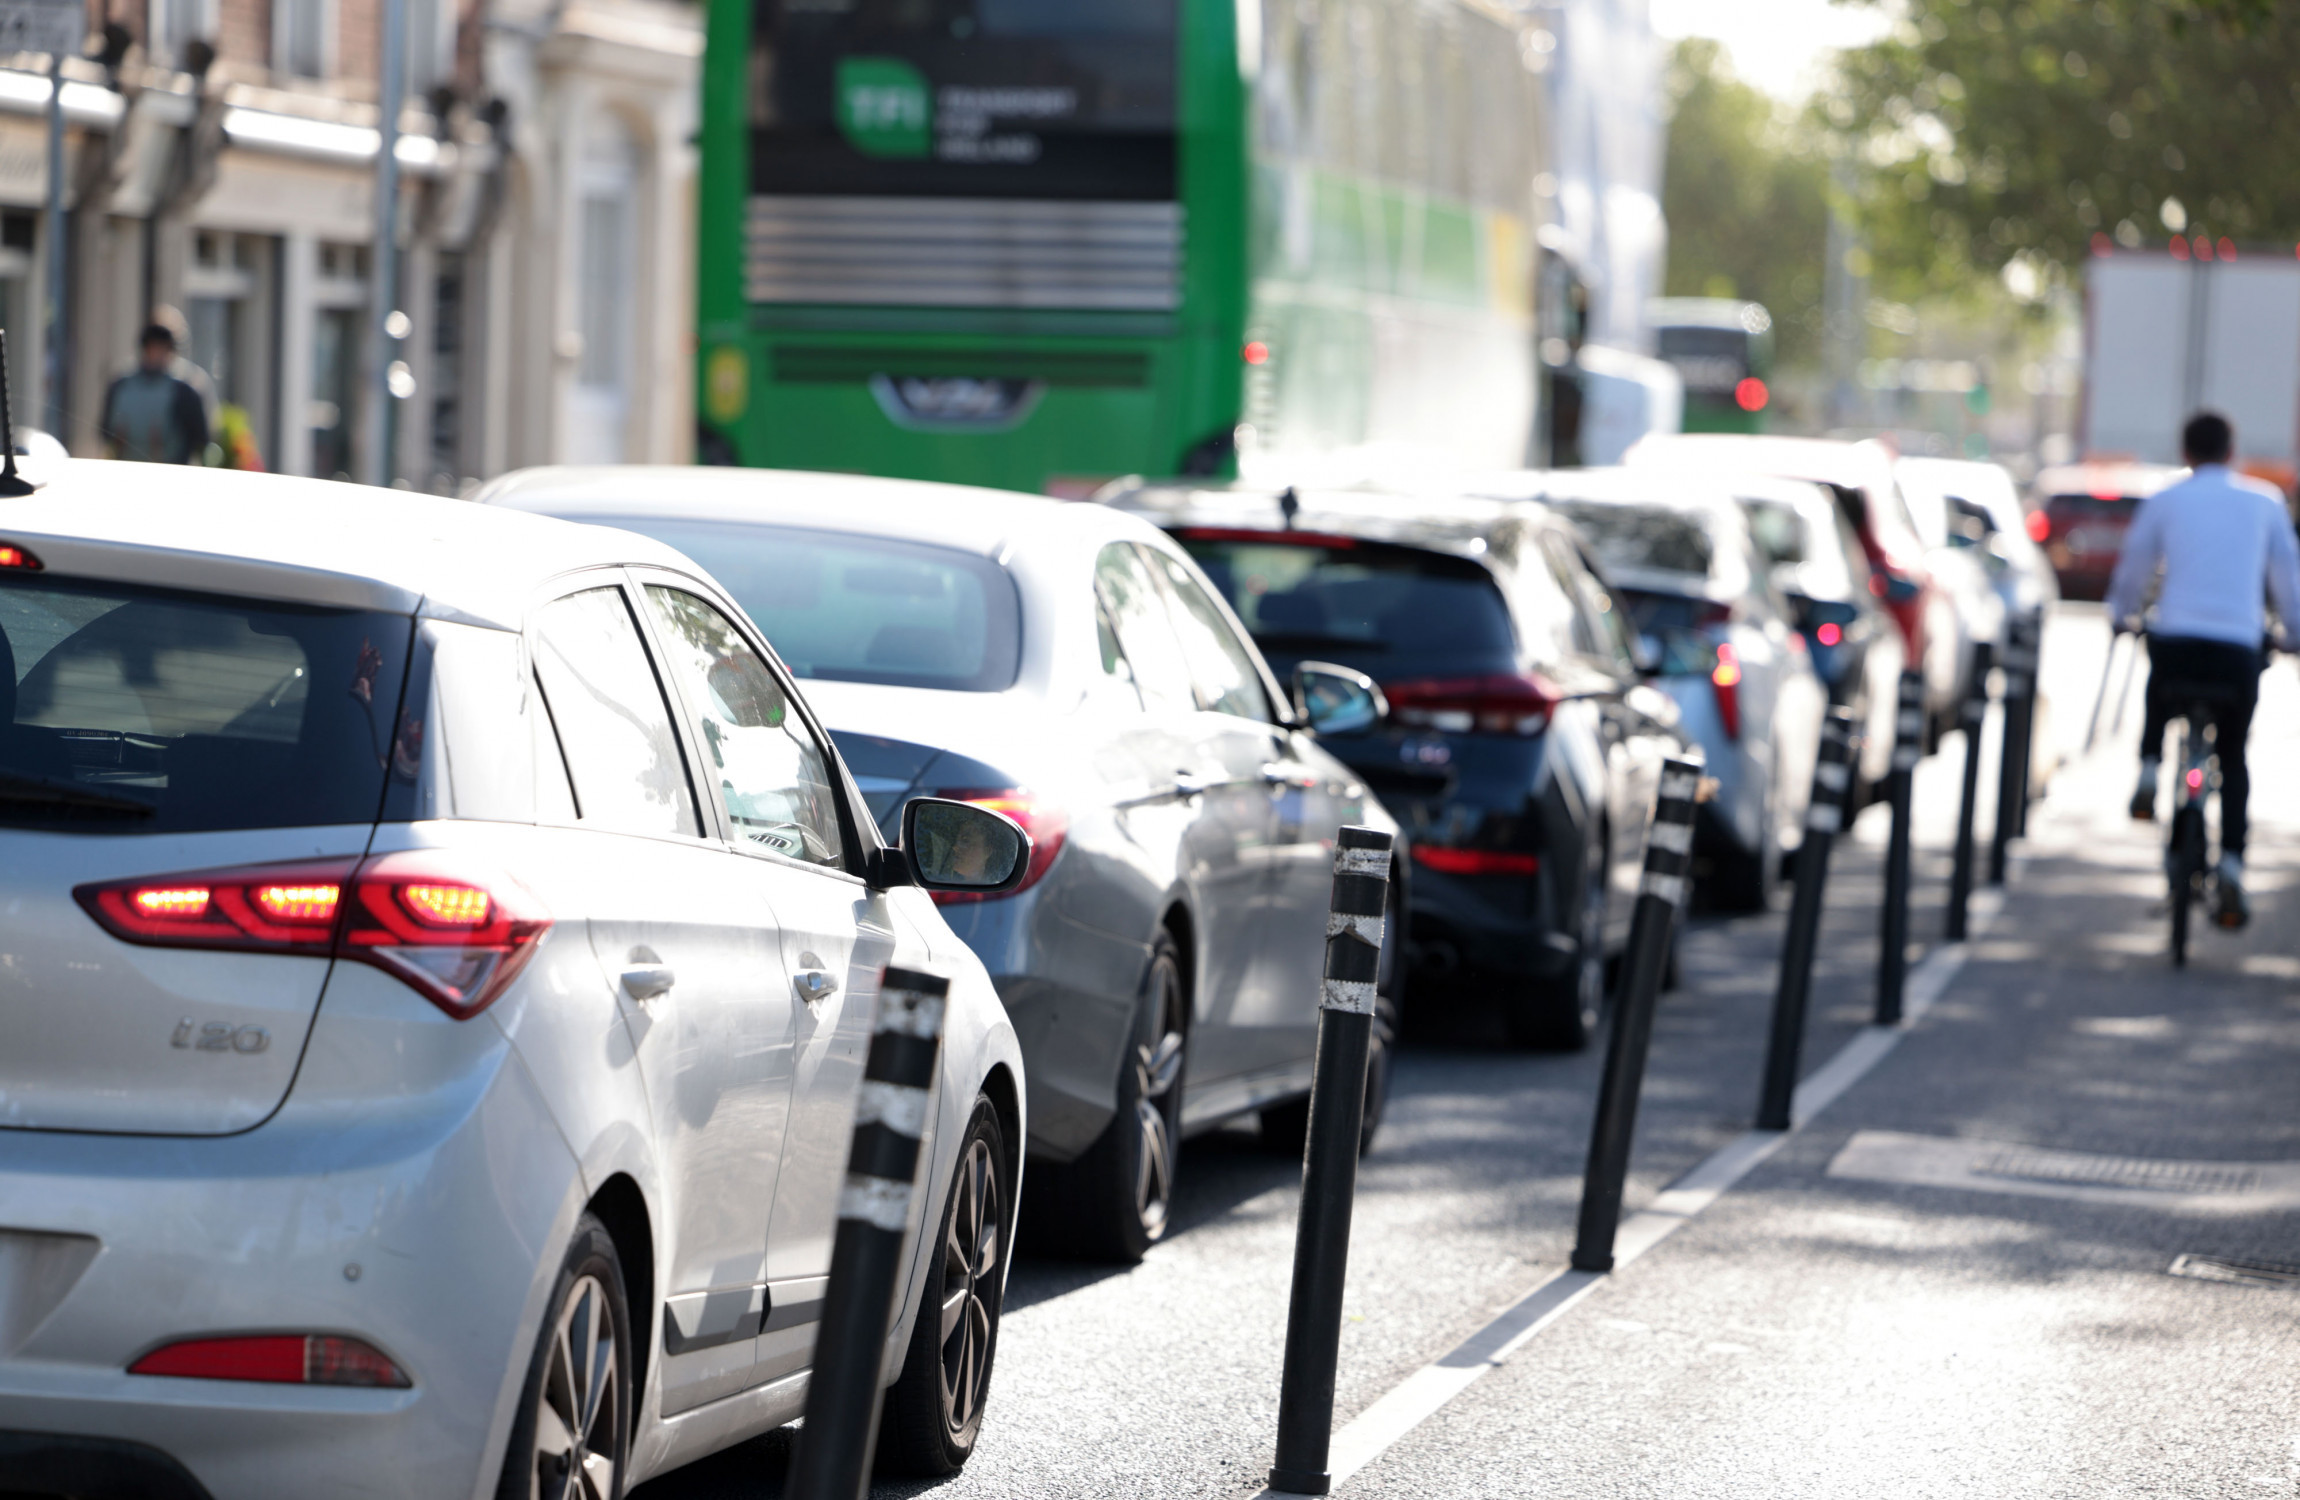 thejournal.ie - Diarmuid Pepper - Retail Excellence Ireland says implementation of Dublin transport plan is 'regrettable'